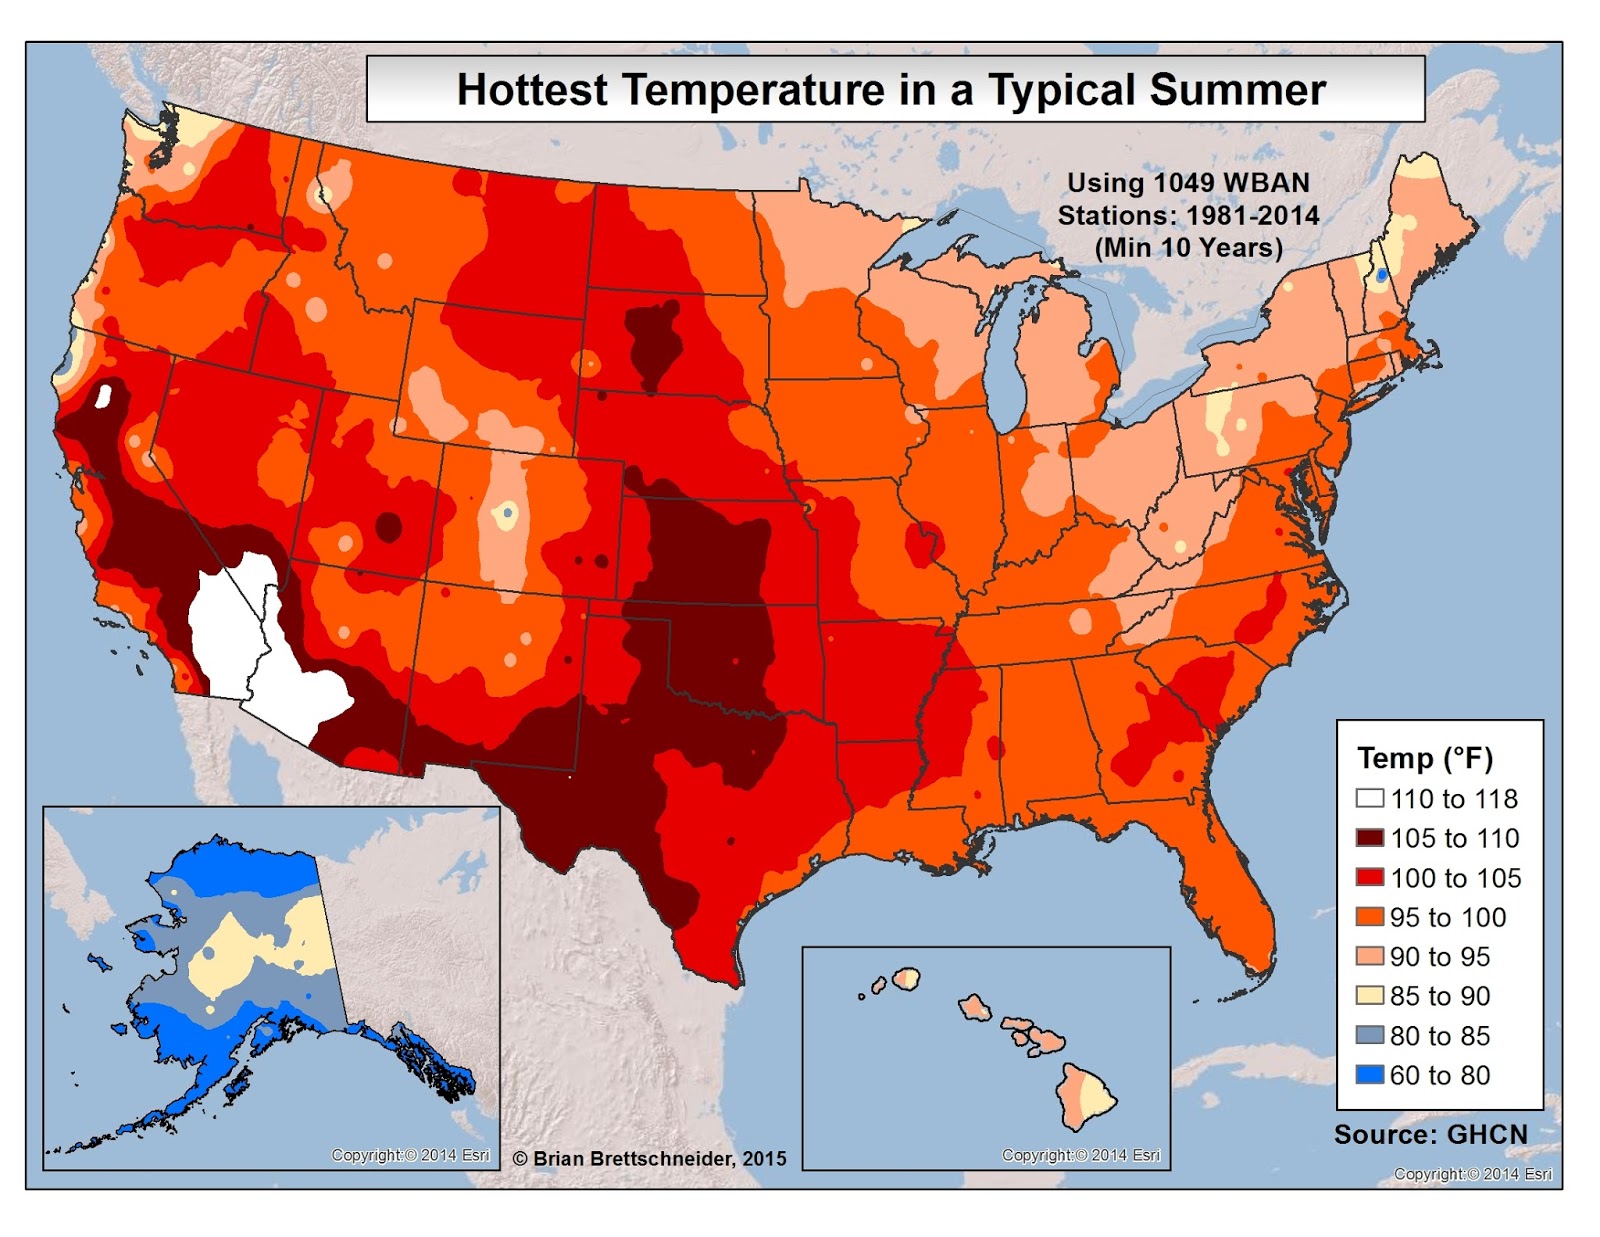 brian-b-s-climate-blog-annual-temperature-extremes